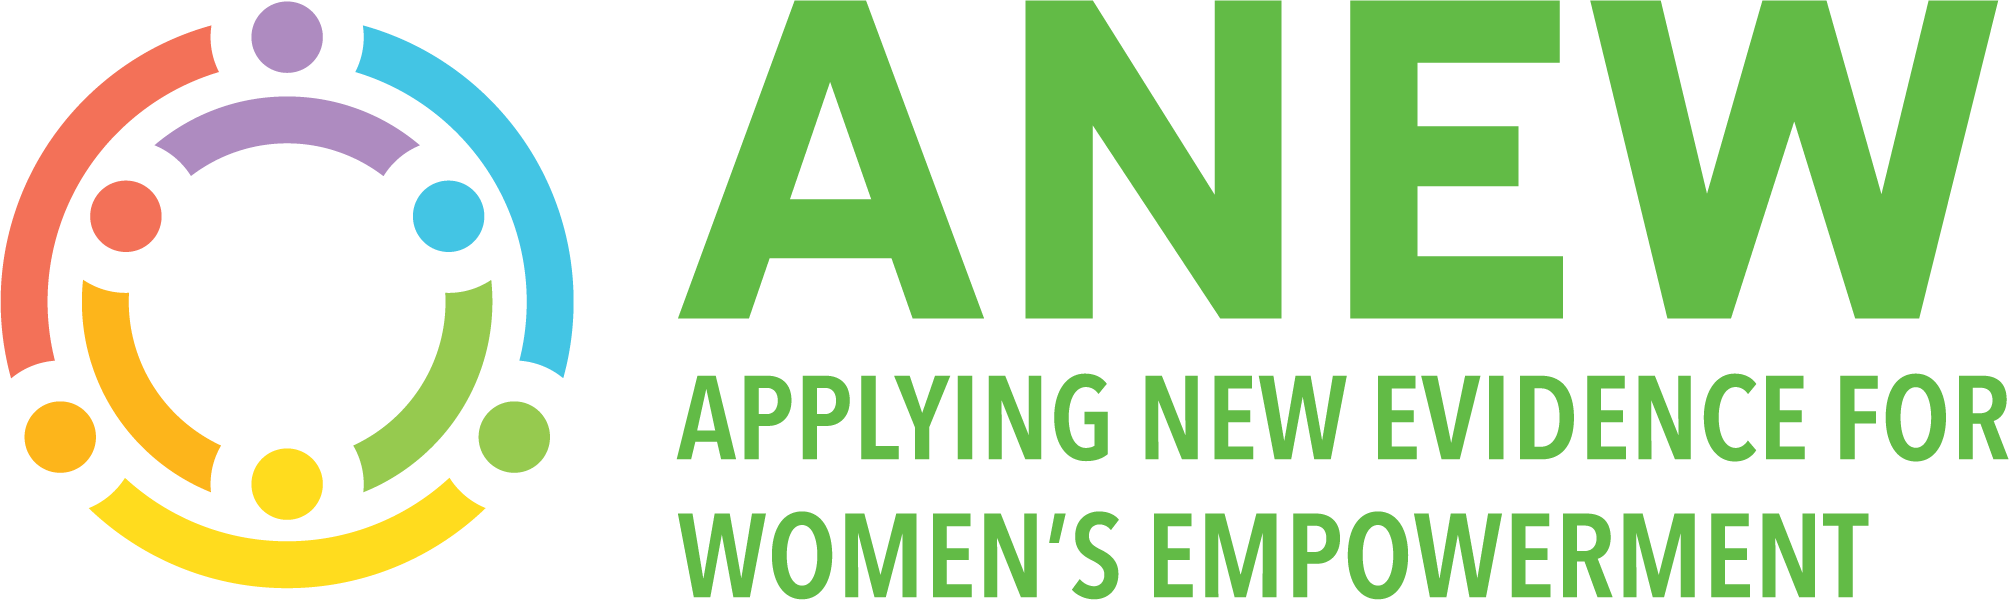 Applying New Evidence for Women’s Empowerment (ANEW)